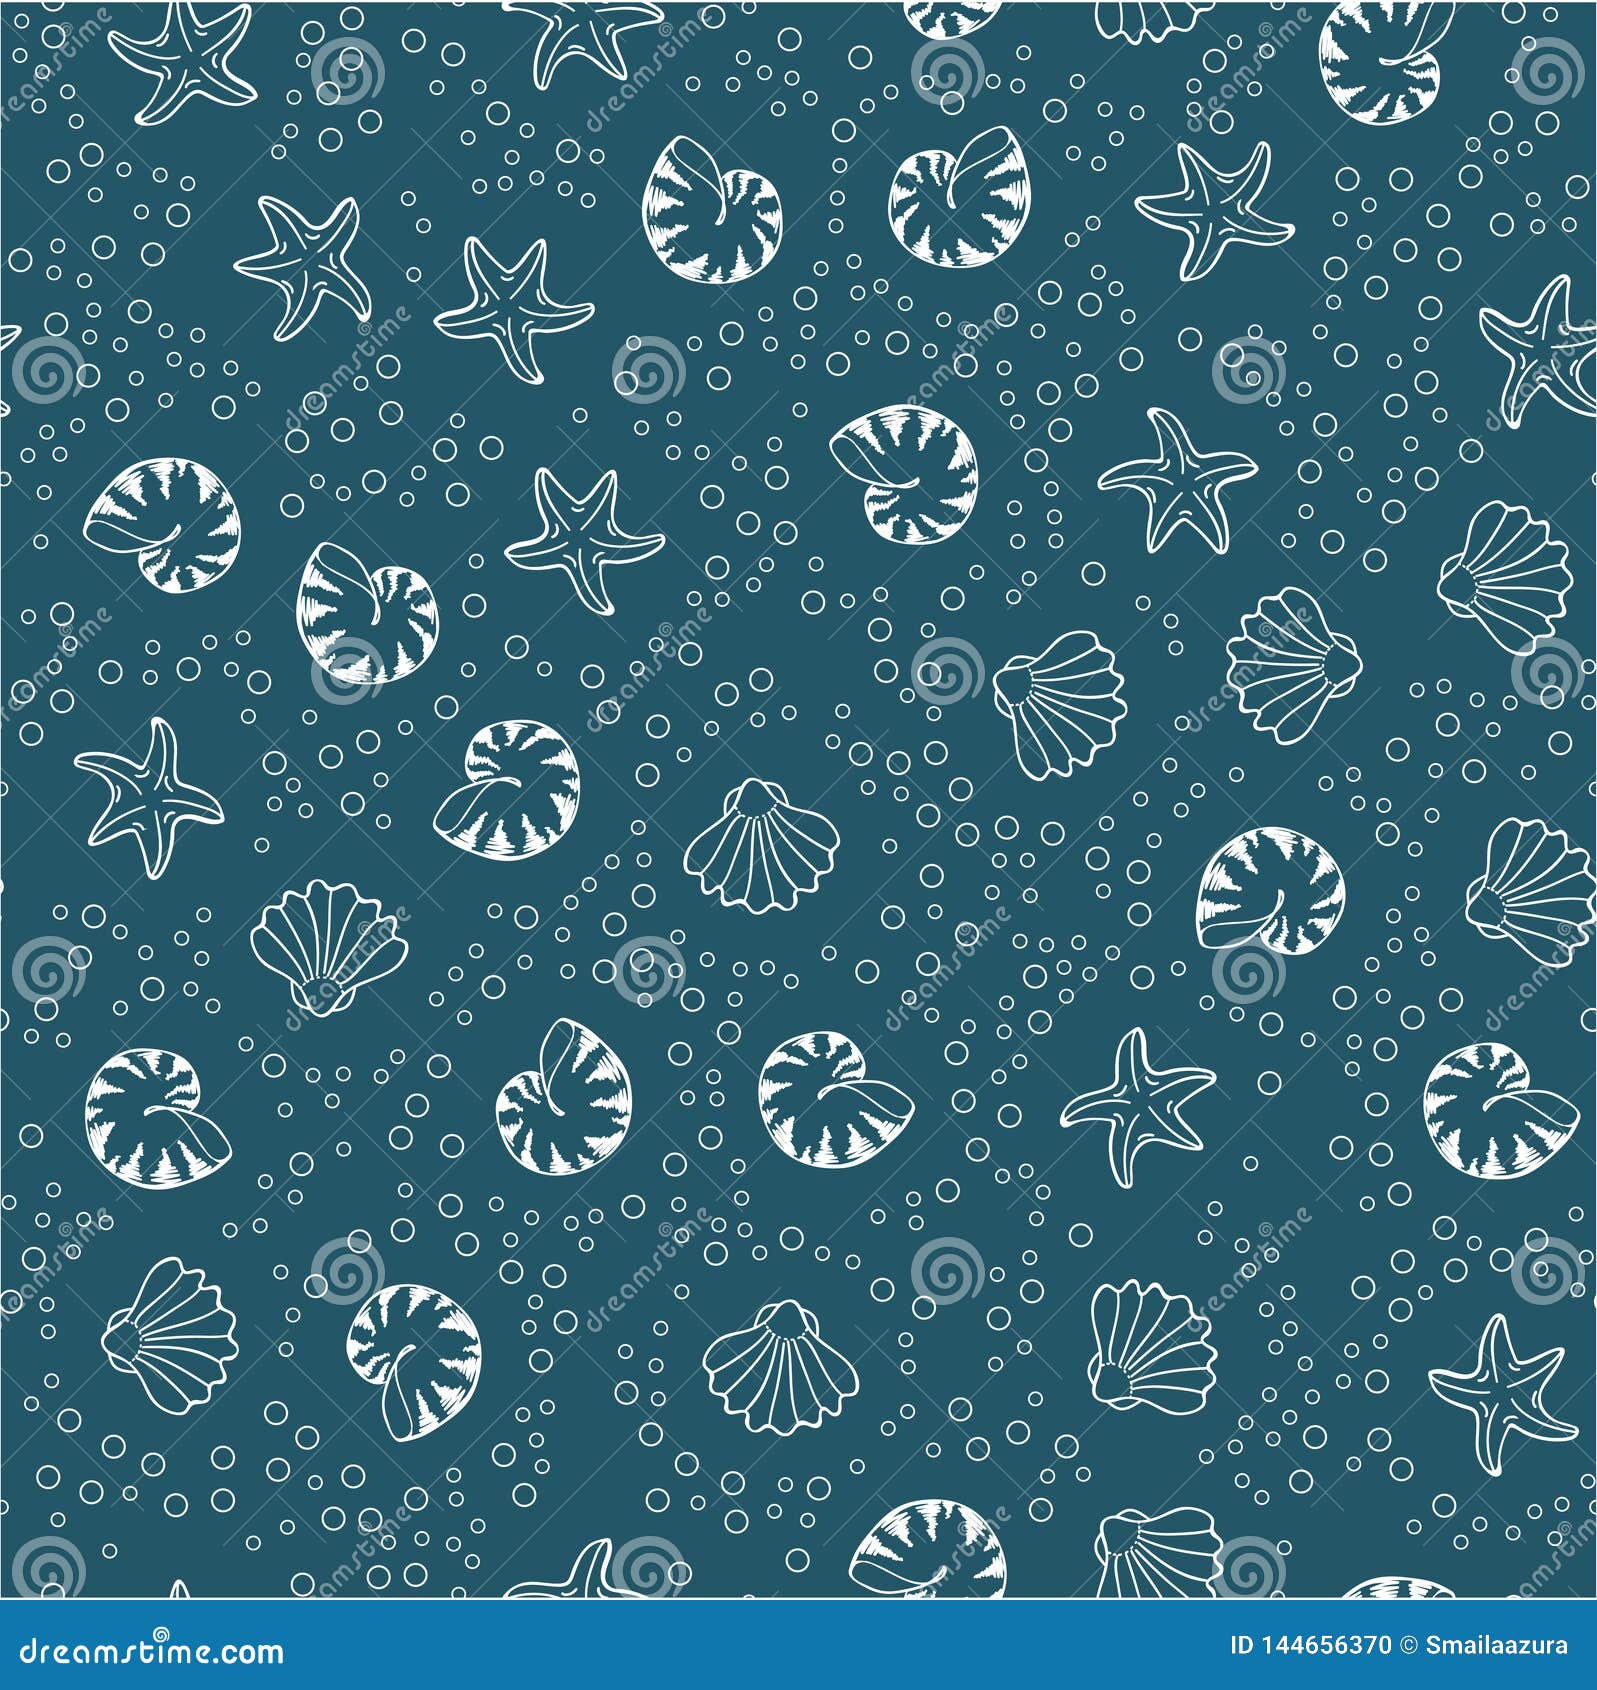 Doodle Sea Life Seamless Pattern for Any Design Purposes. Stock Vector ...